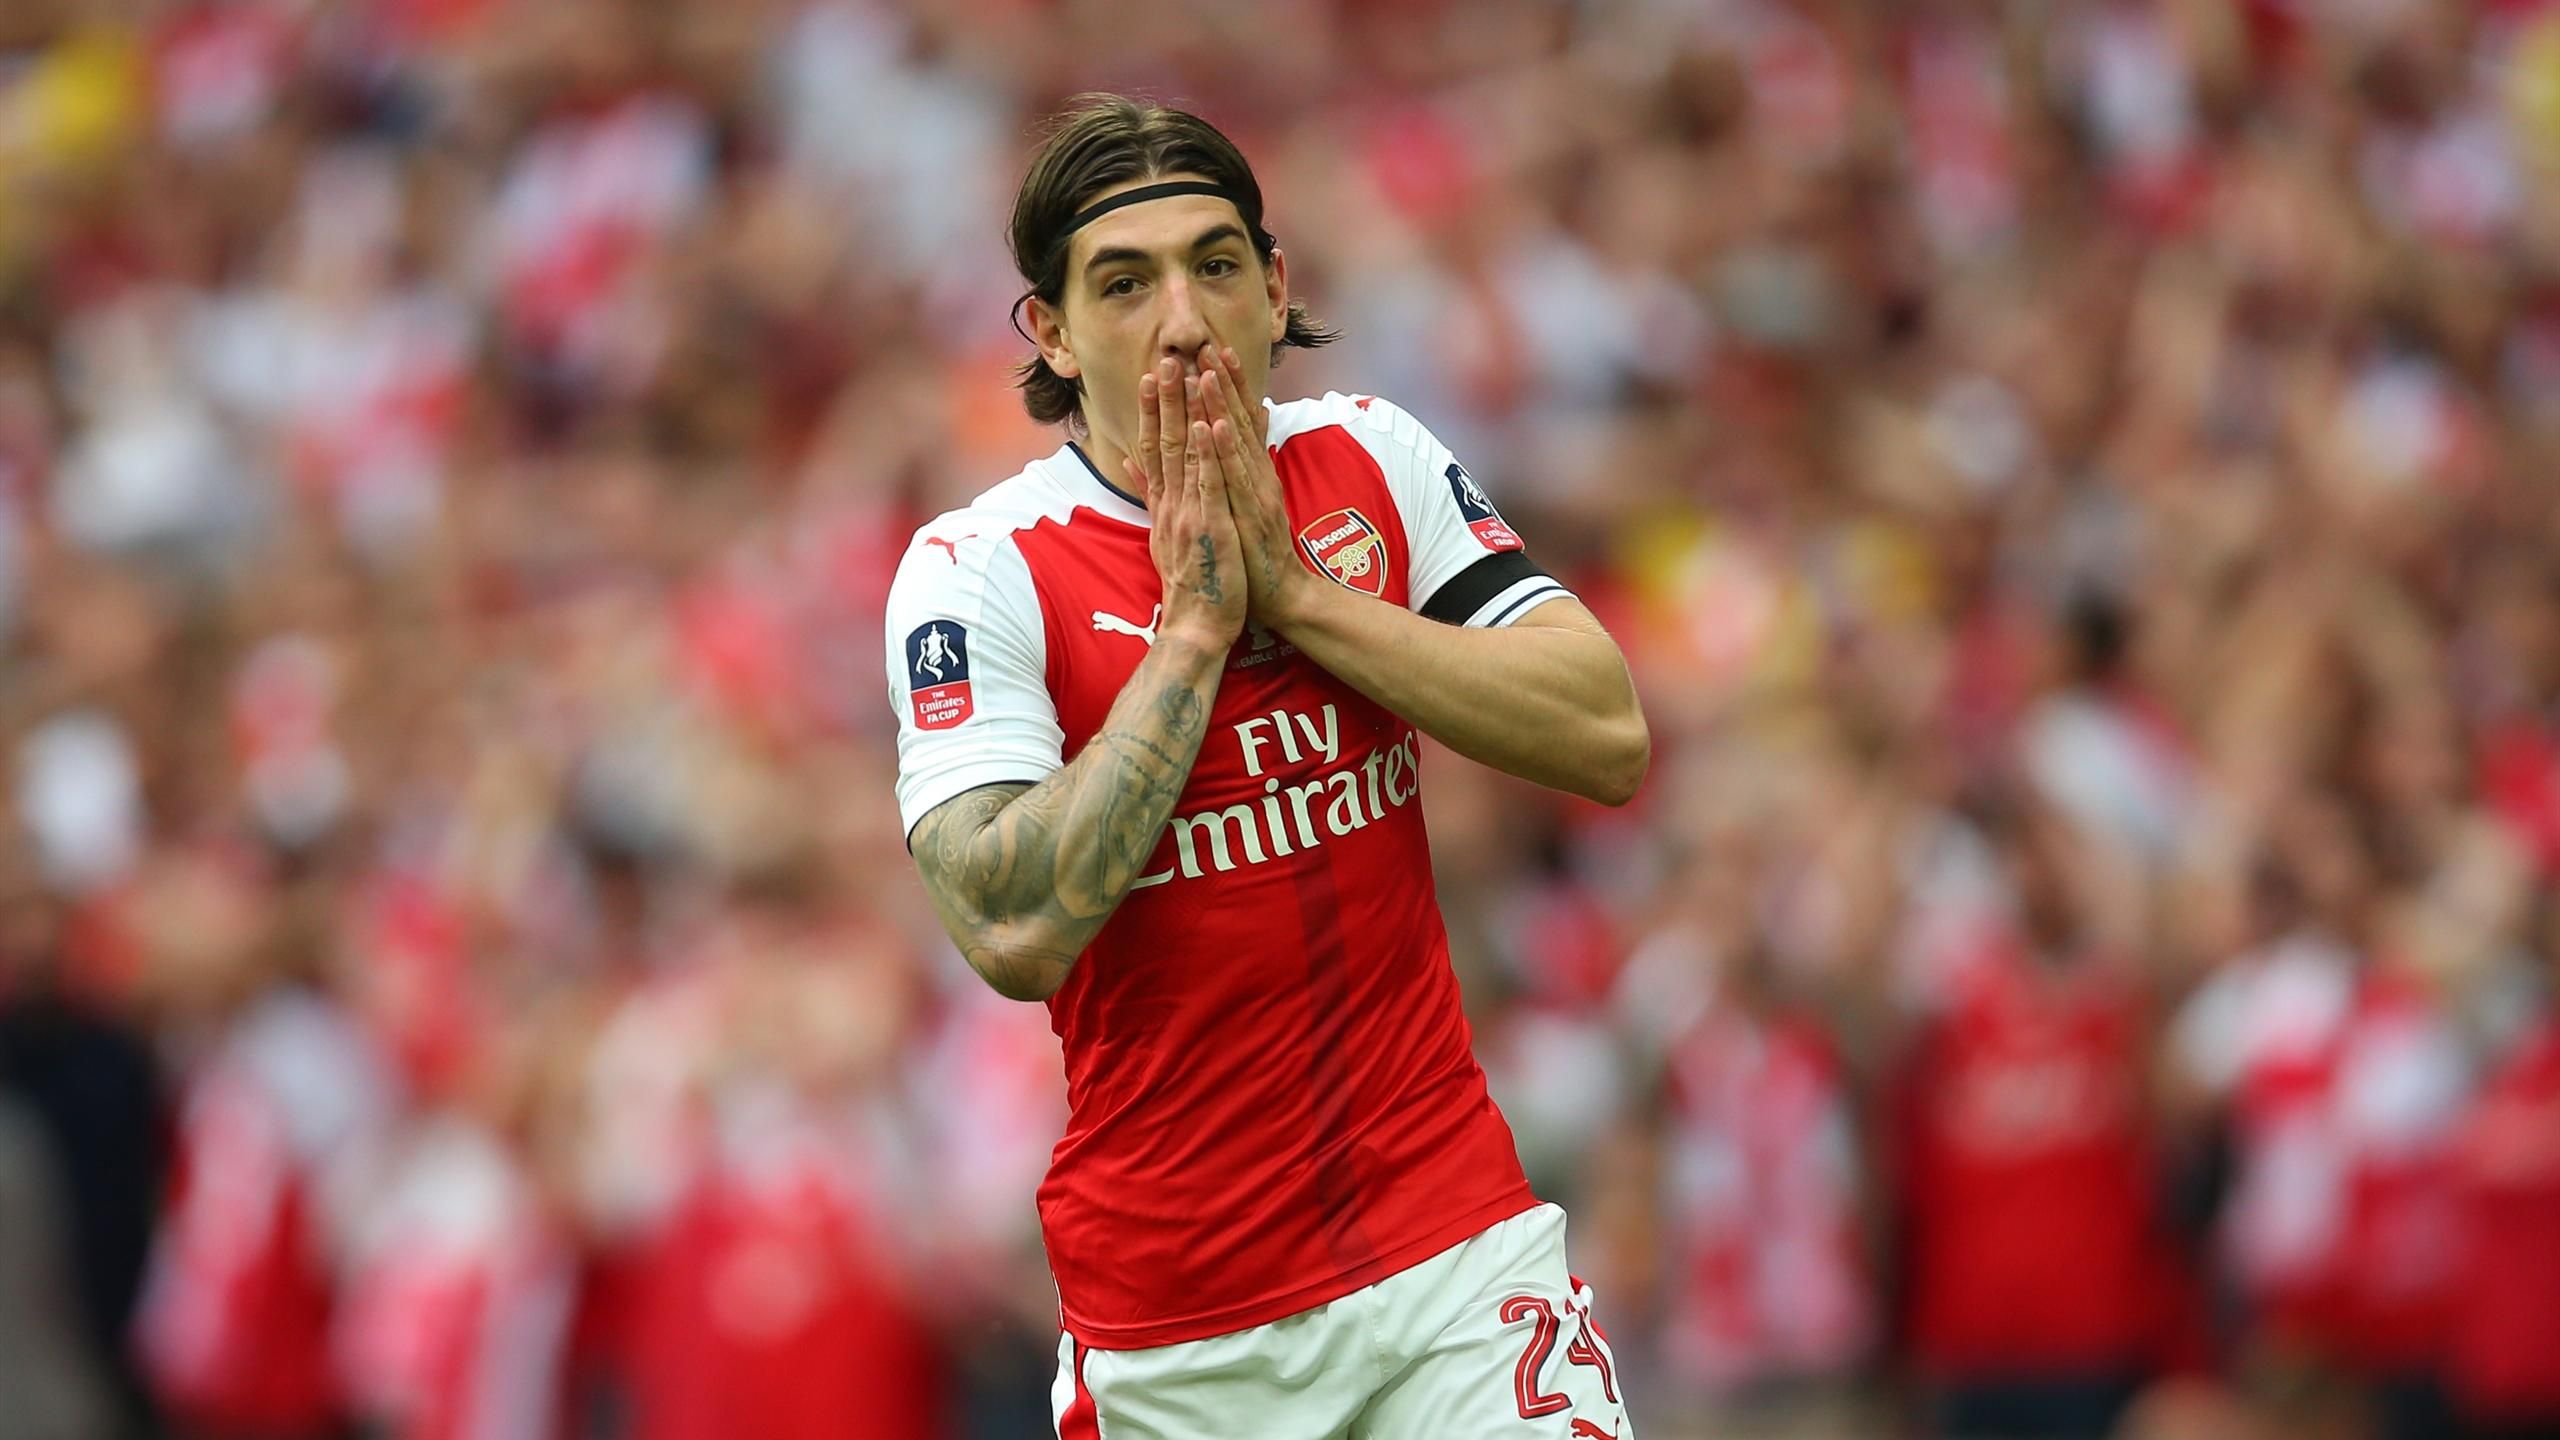 Hector Bellerin: The Most Fashionable Fútbol Player